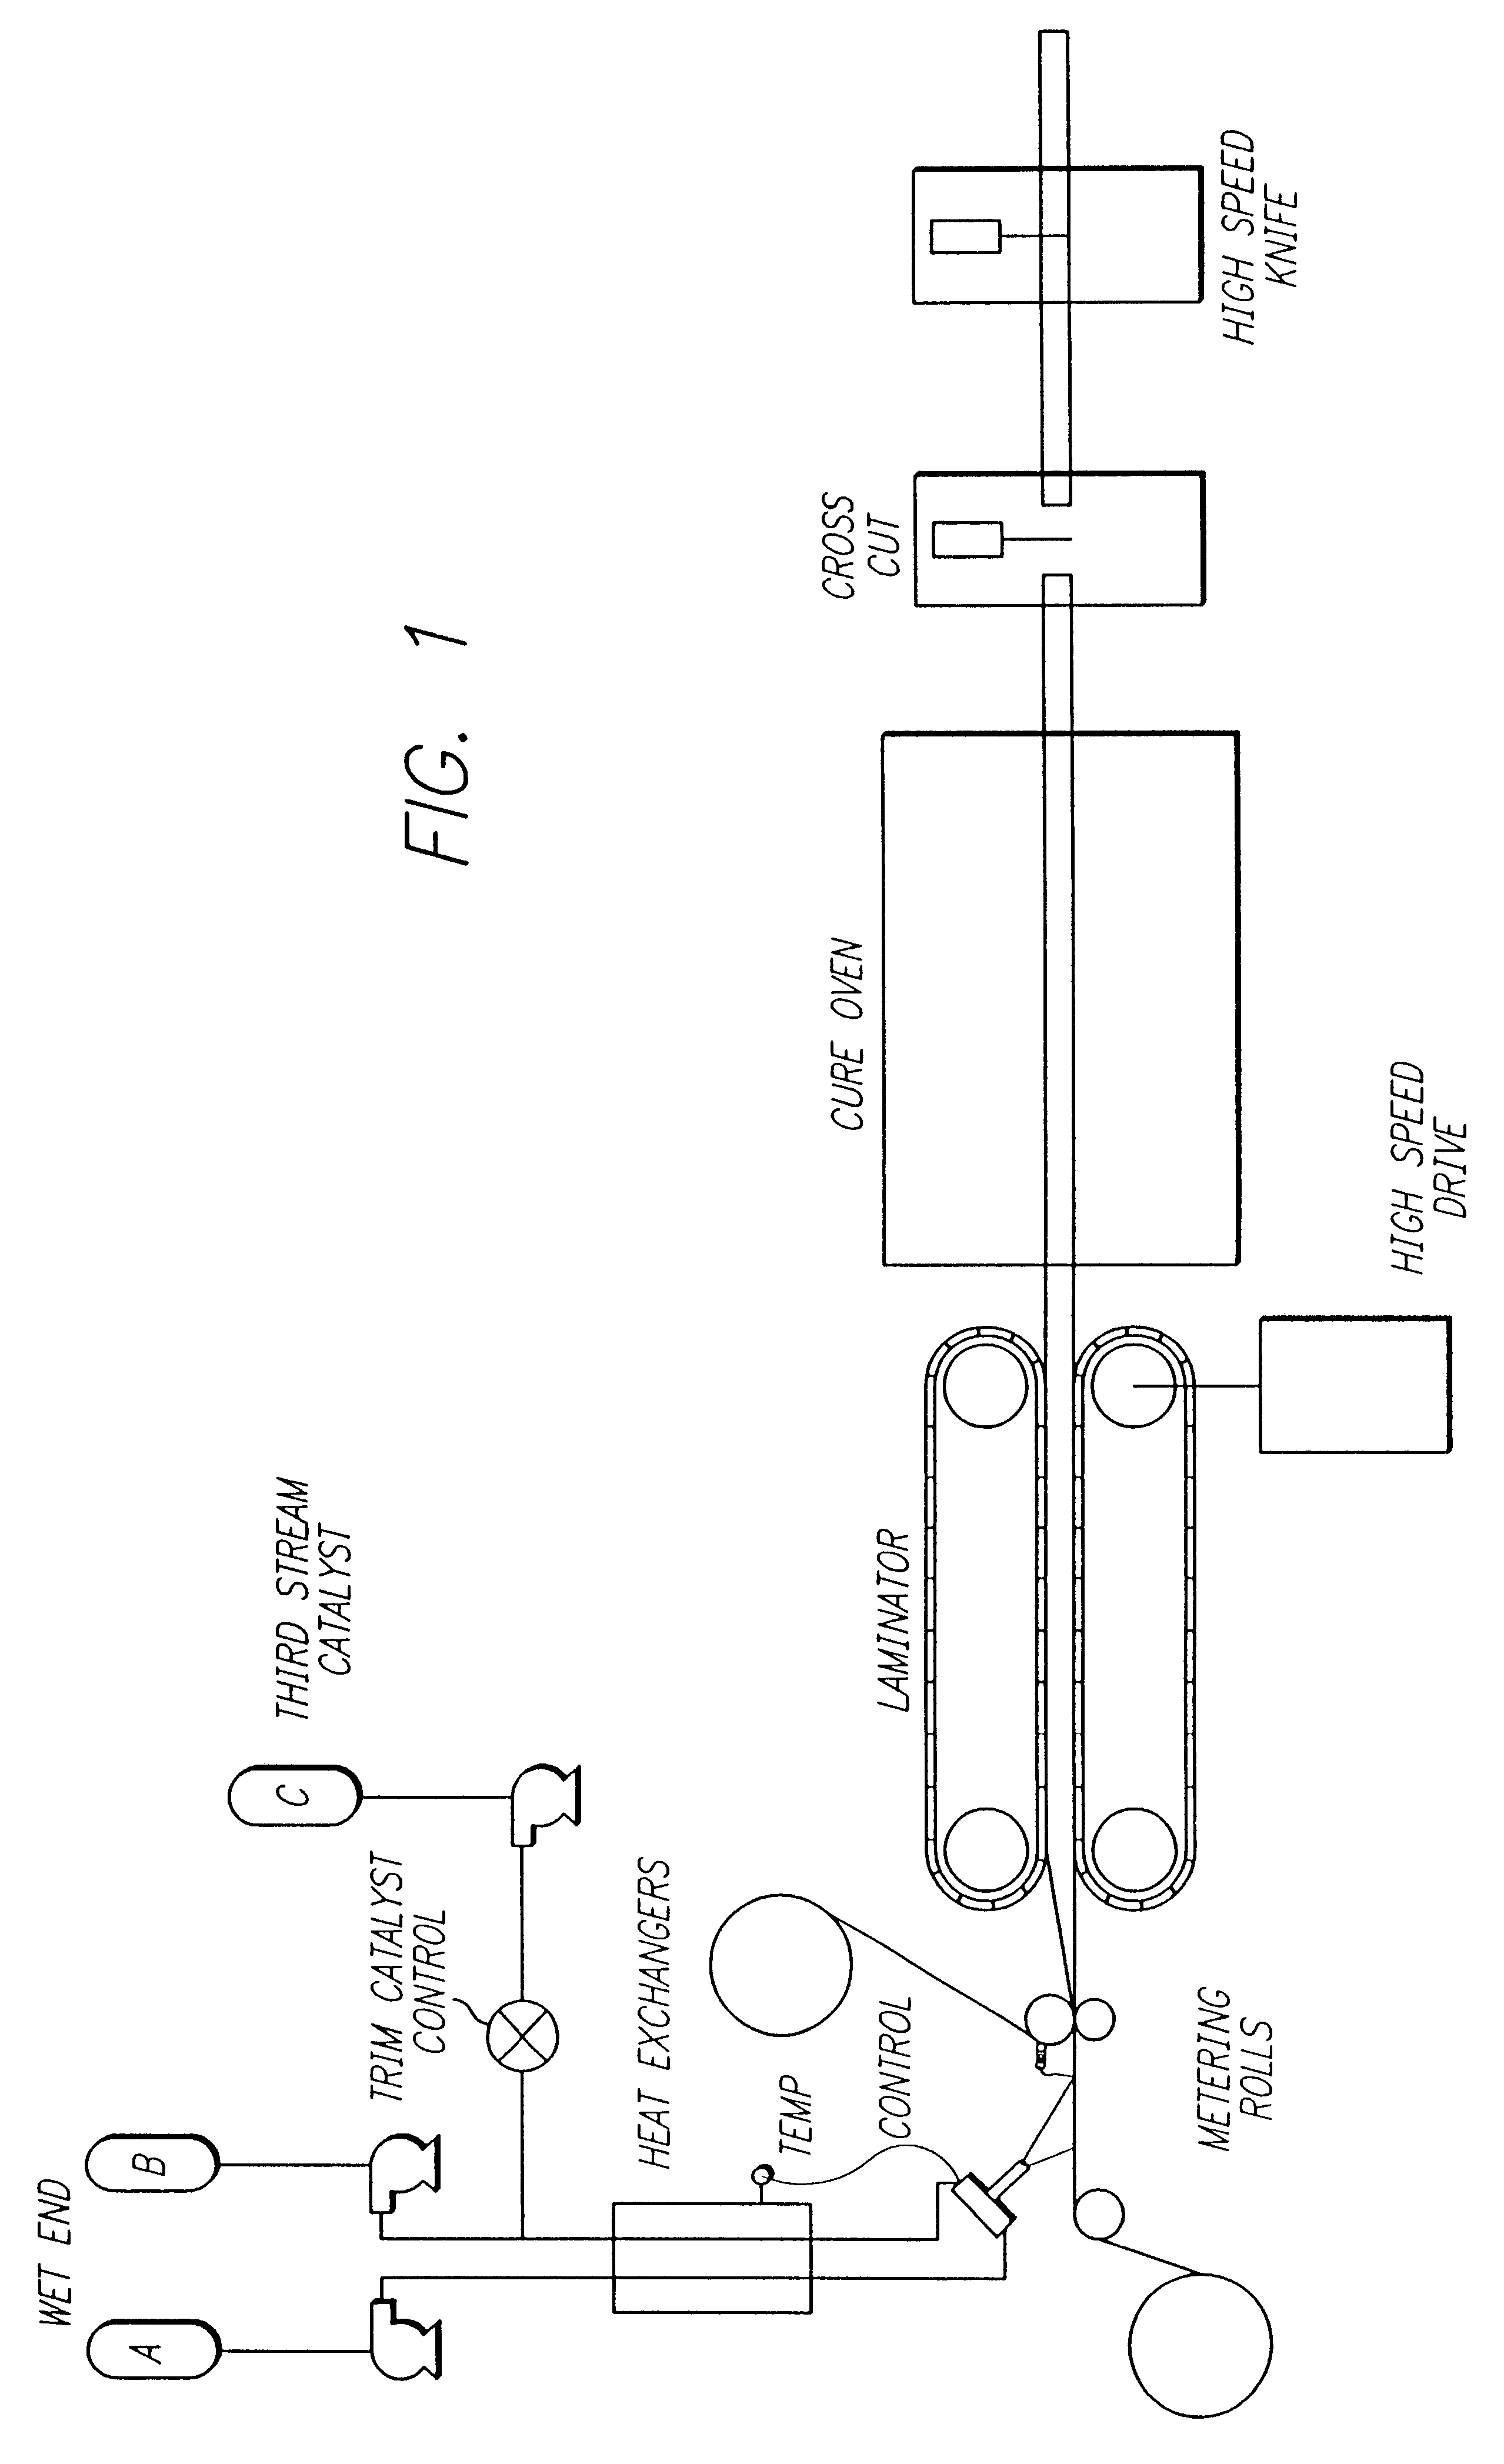 Process for manufacturing rigid polyisocyanurate foam products